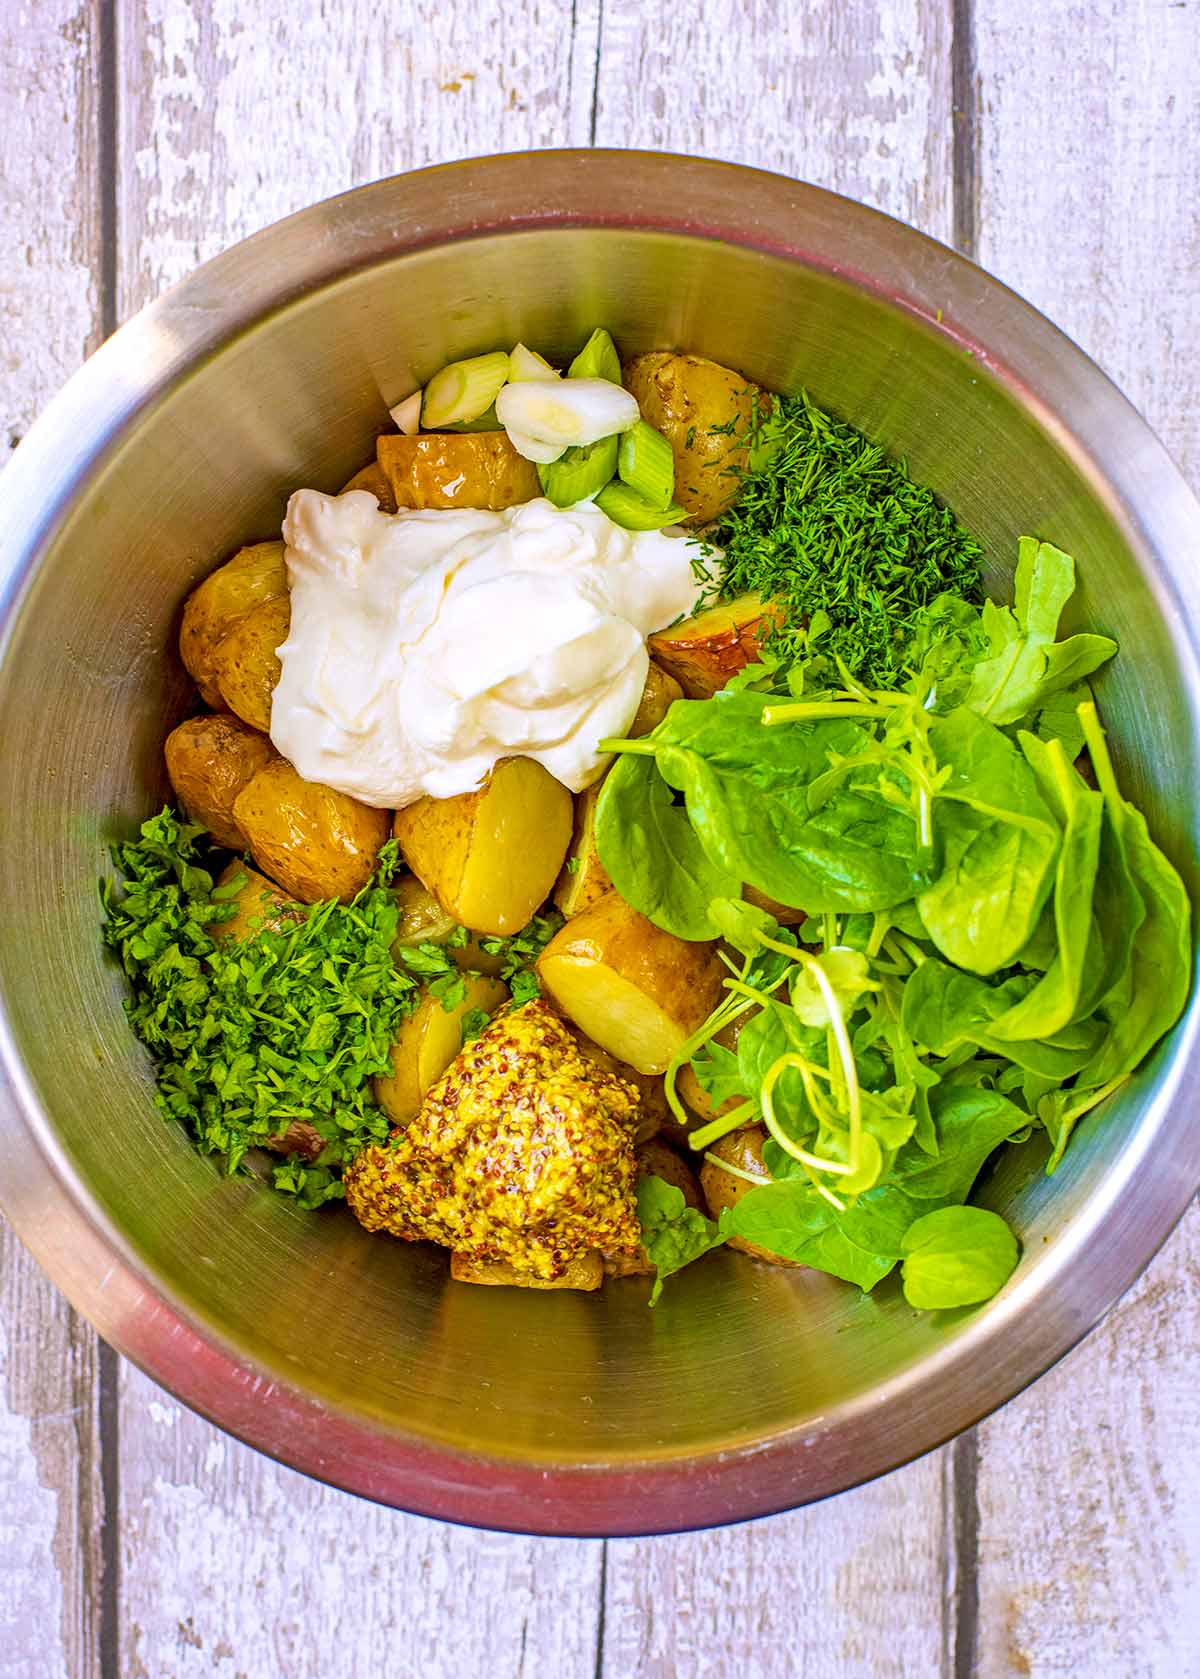 A large mixing bowl containing potatoes, salad leaves, mustard, herbs and creme fraiche.